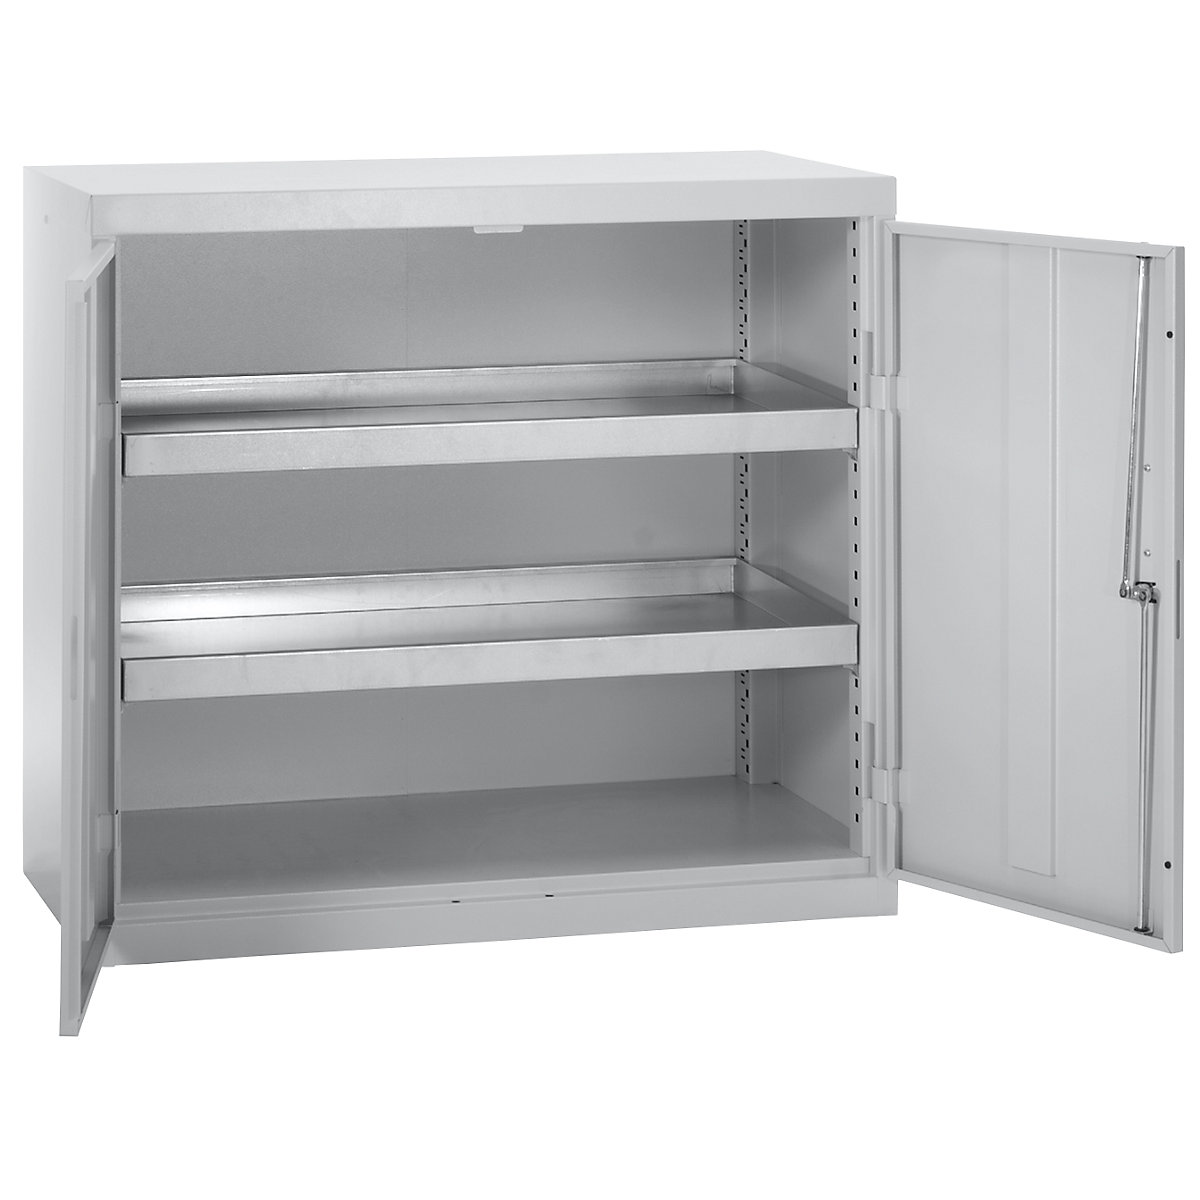 Environmental cupboard without door perforations, HxWxD 900 x 1000 x 500 mm, 2 tray shelves, light grey / light grey-5